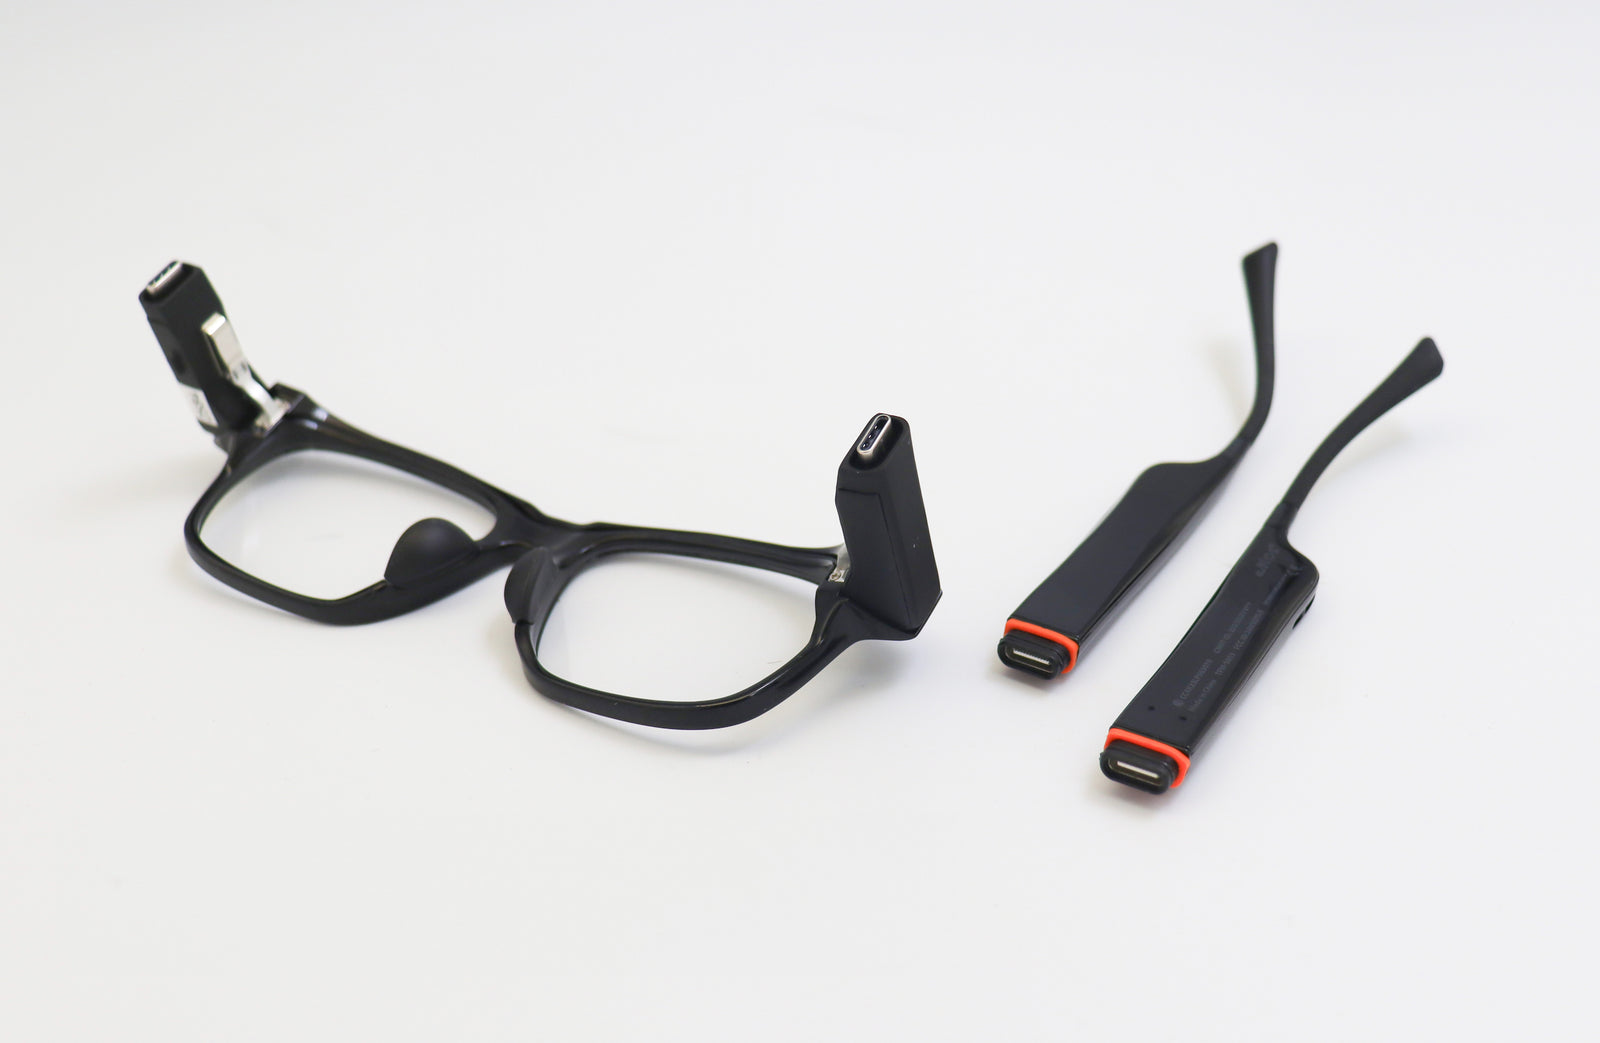 9TO5Google reports Solos AirGo smart glasses with Google Gemini and GPT-4o